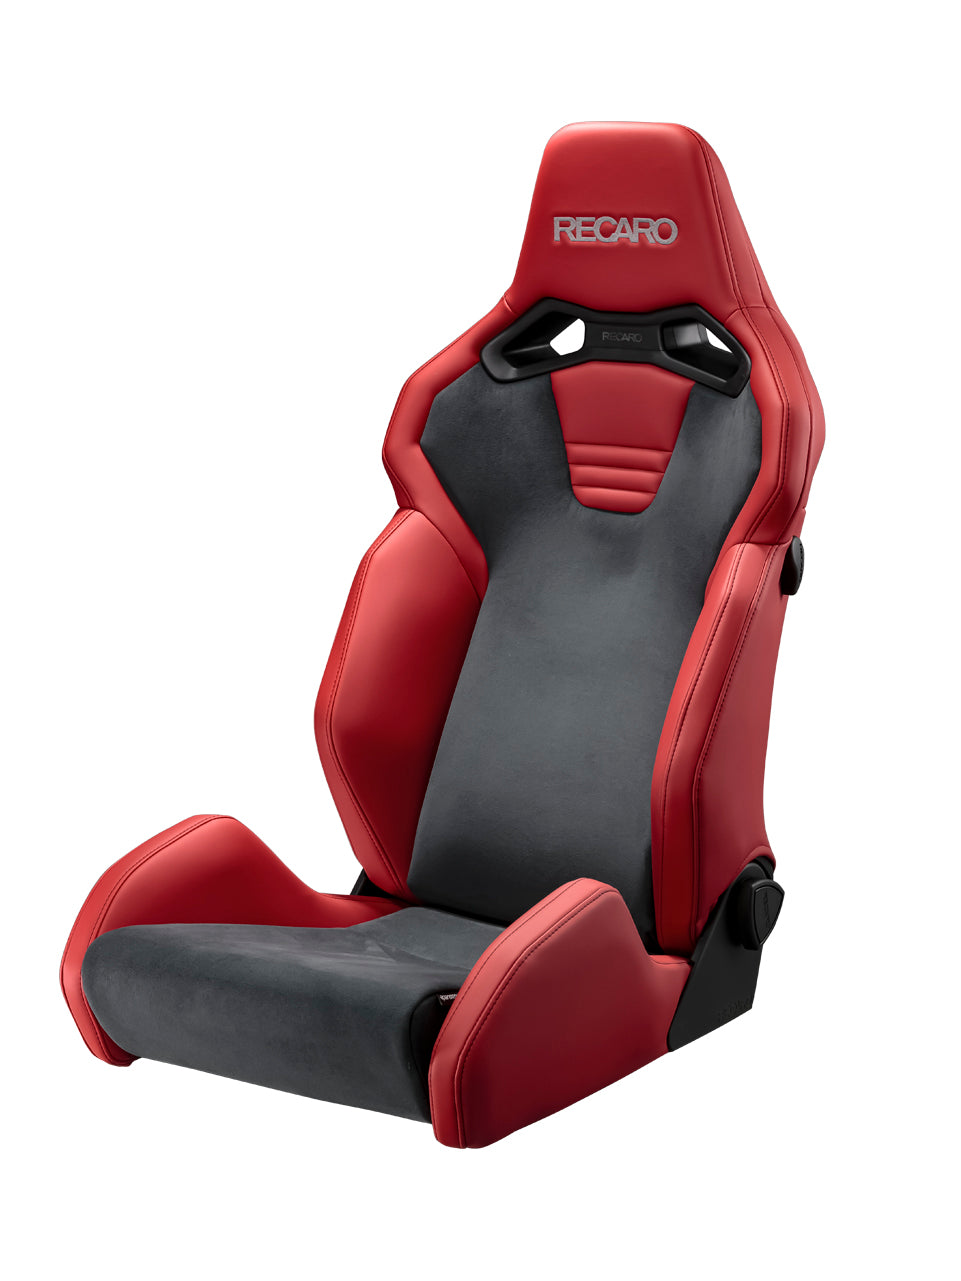 RECARO SR-S UT100 CG RD ULTRA SUEDE CHARCOAL GRAY AND ARTIFICIAL LEATHER RED COLOR WITH HEATED SEATS 81-120.21.647-0